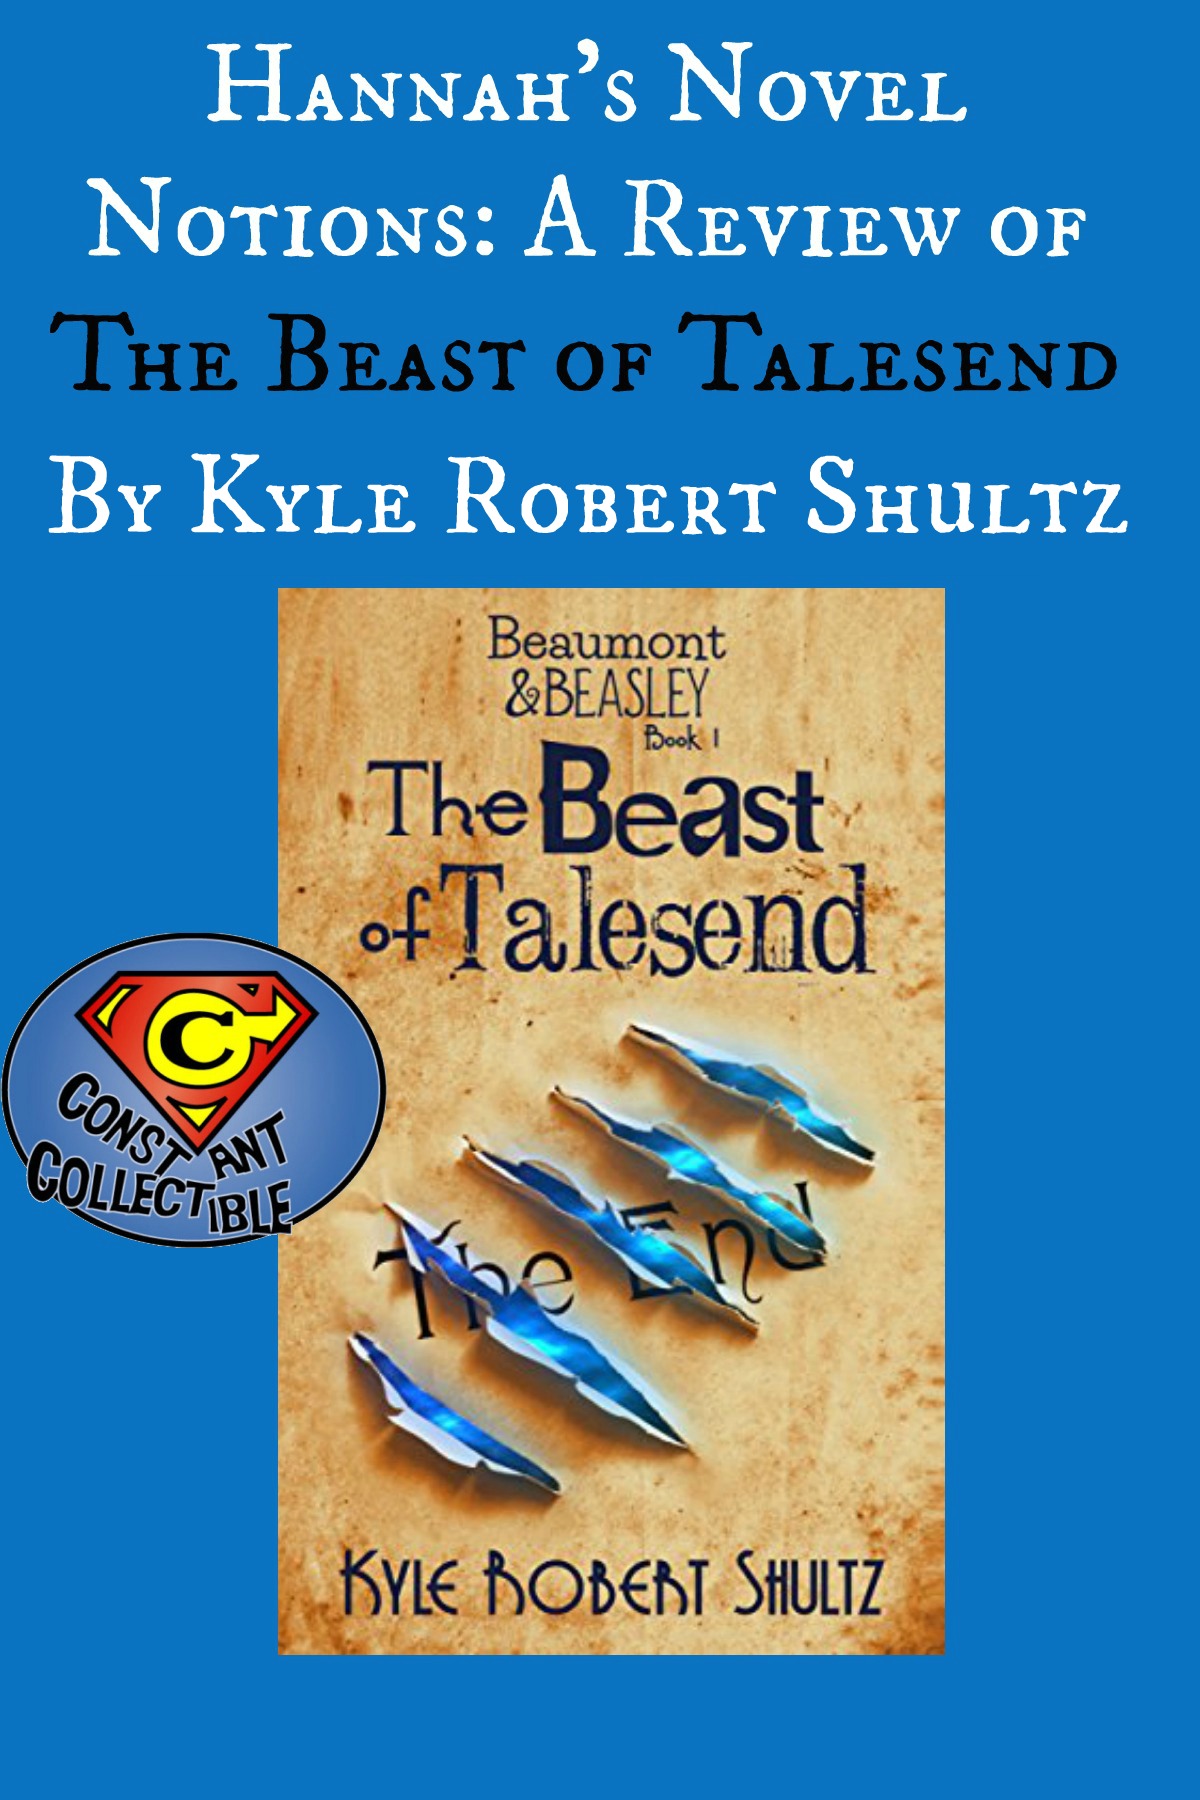 Hannah's Novel Notions: A Review of The Beast of Talesend by Kyle Robert Schultz